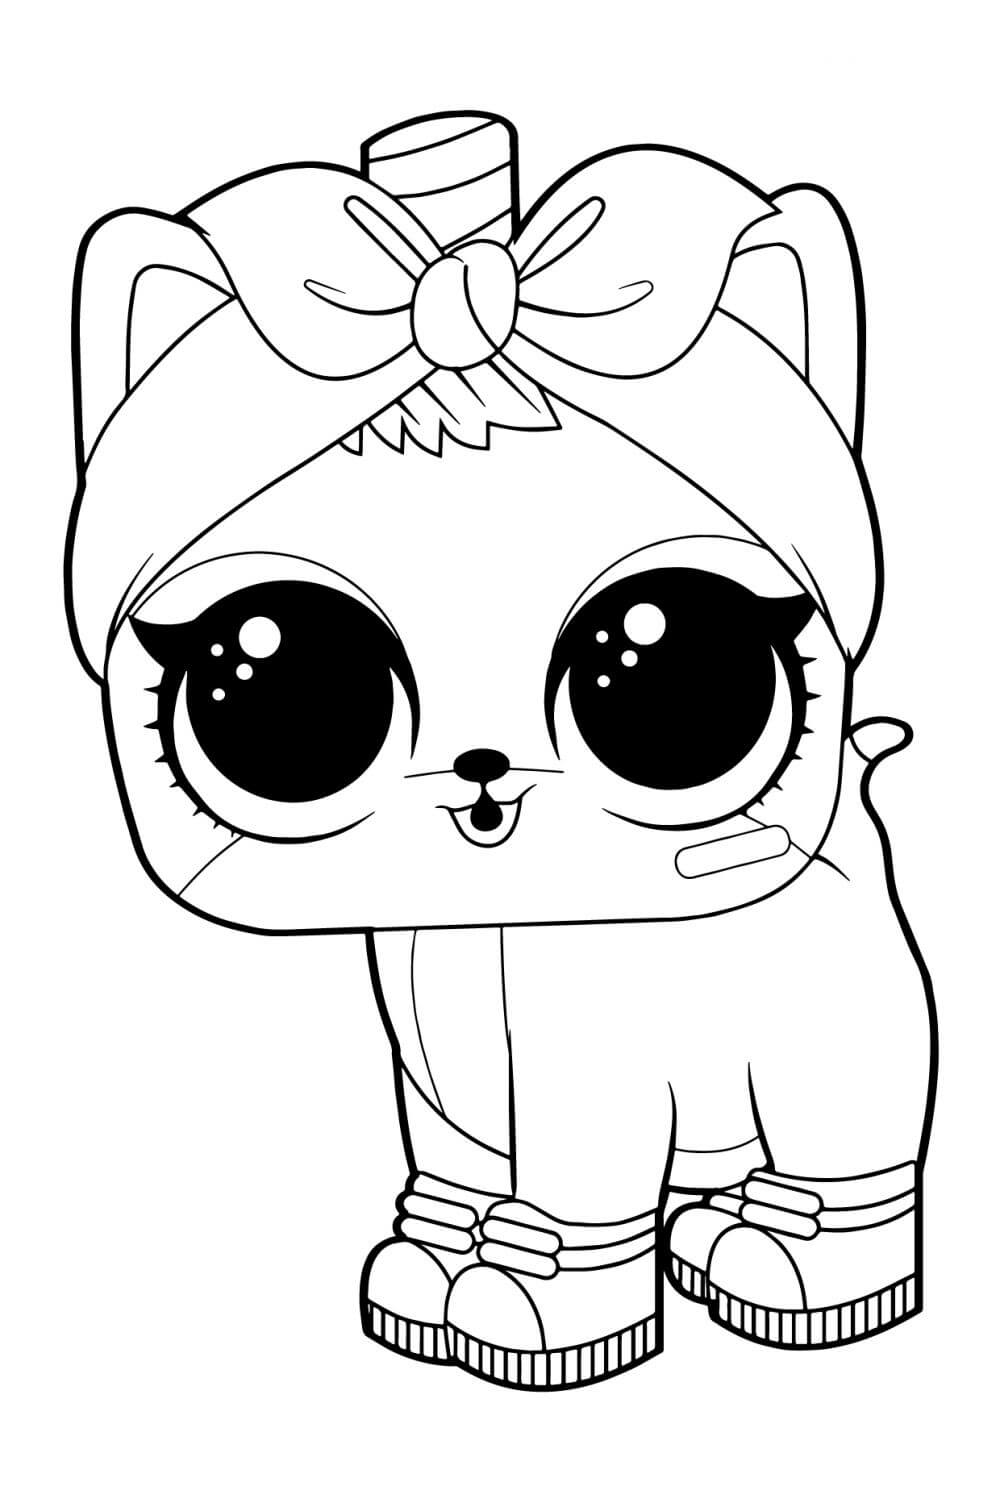 Lol Kitty Coloring Pages & coloring book. 6000+ coloring pages.